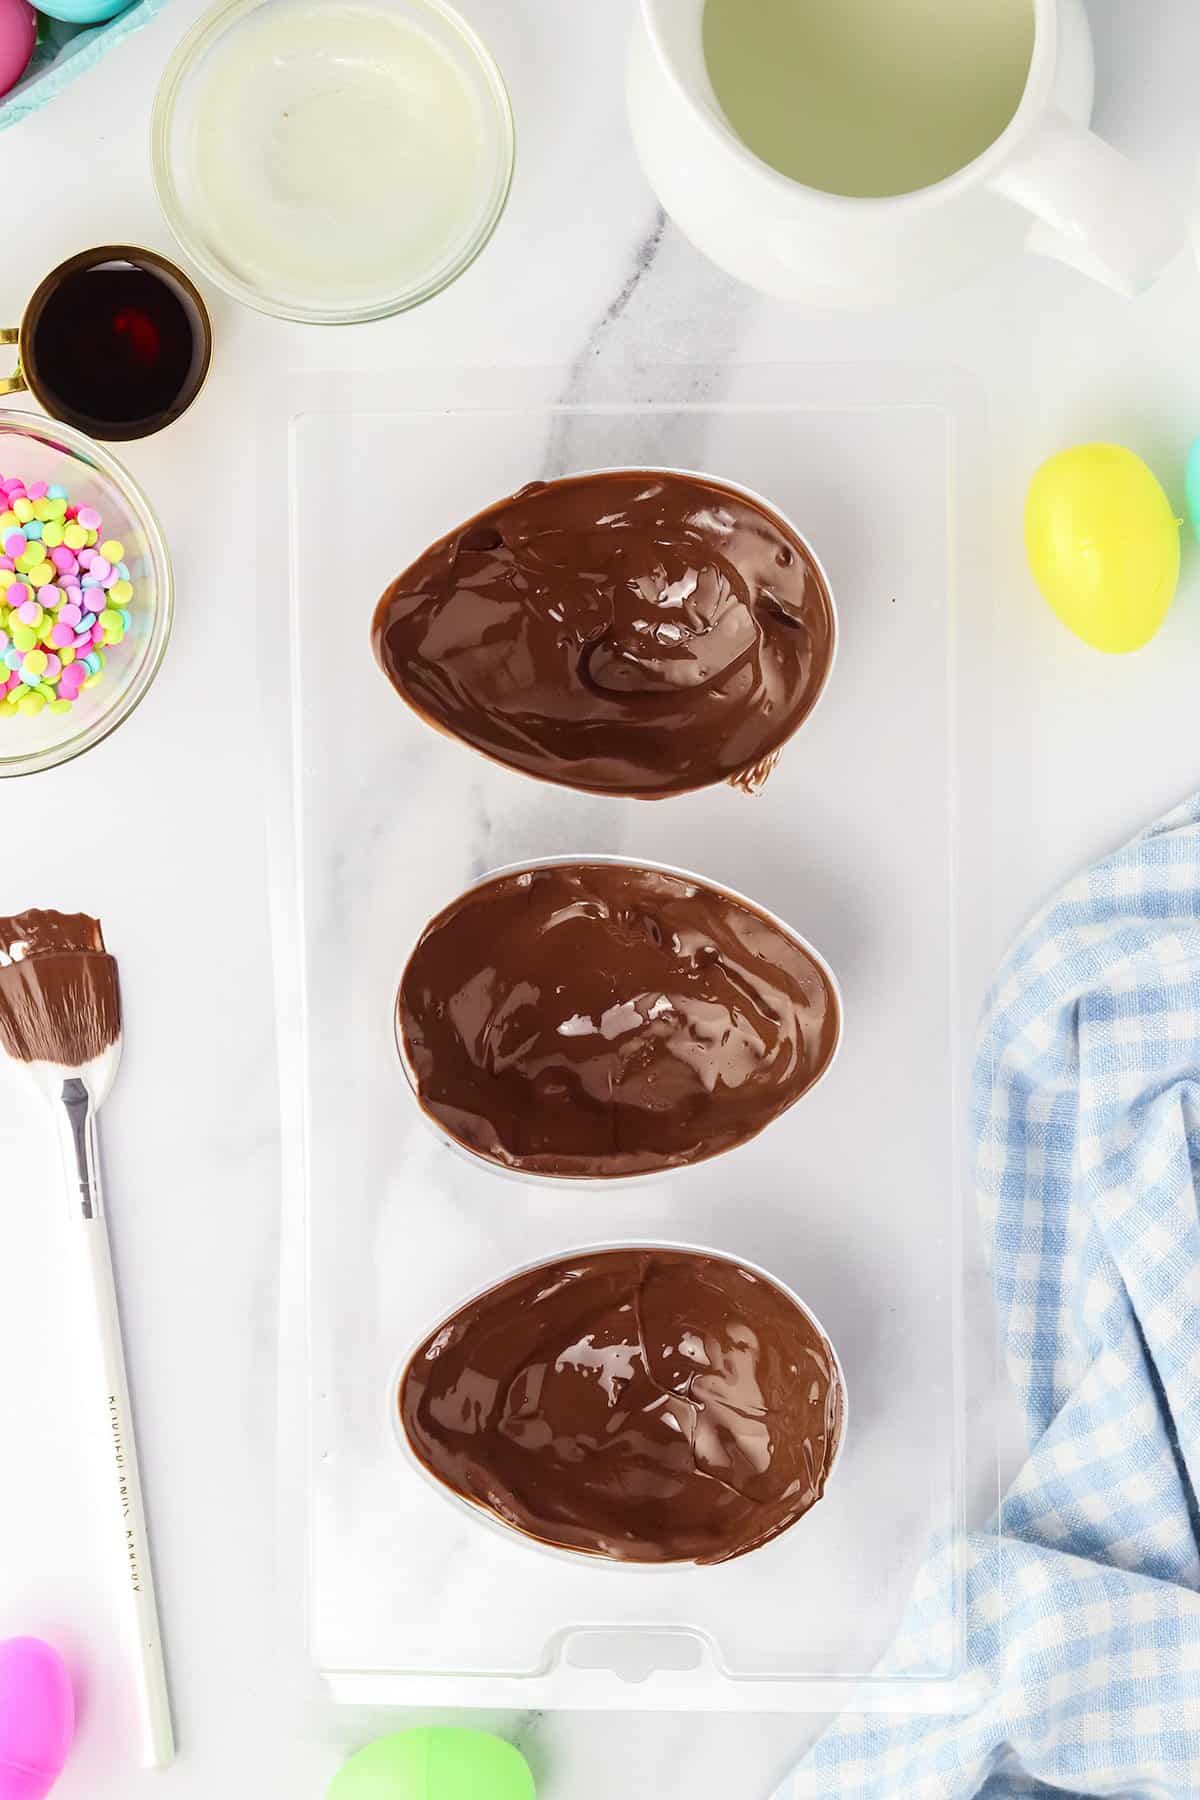 Three chocolate Easter egg halves in a mold, surrounded by ingredients and tools for making homemade Copycat Creme Egg candy.